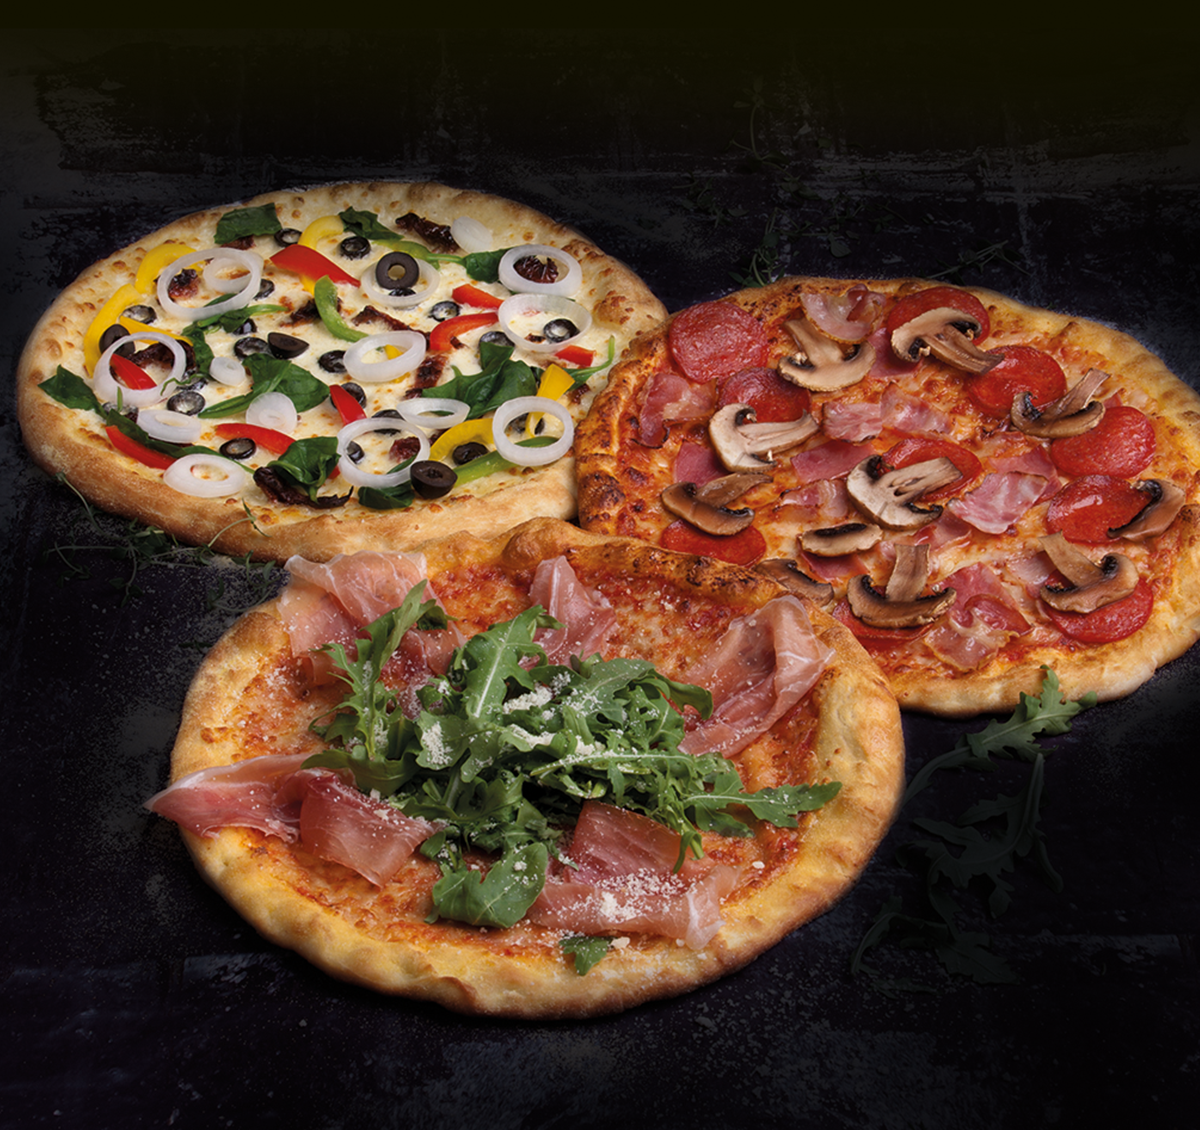 -50% promotion for 3 pizzas